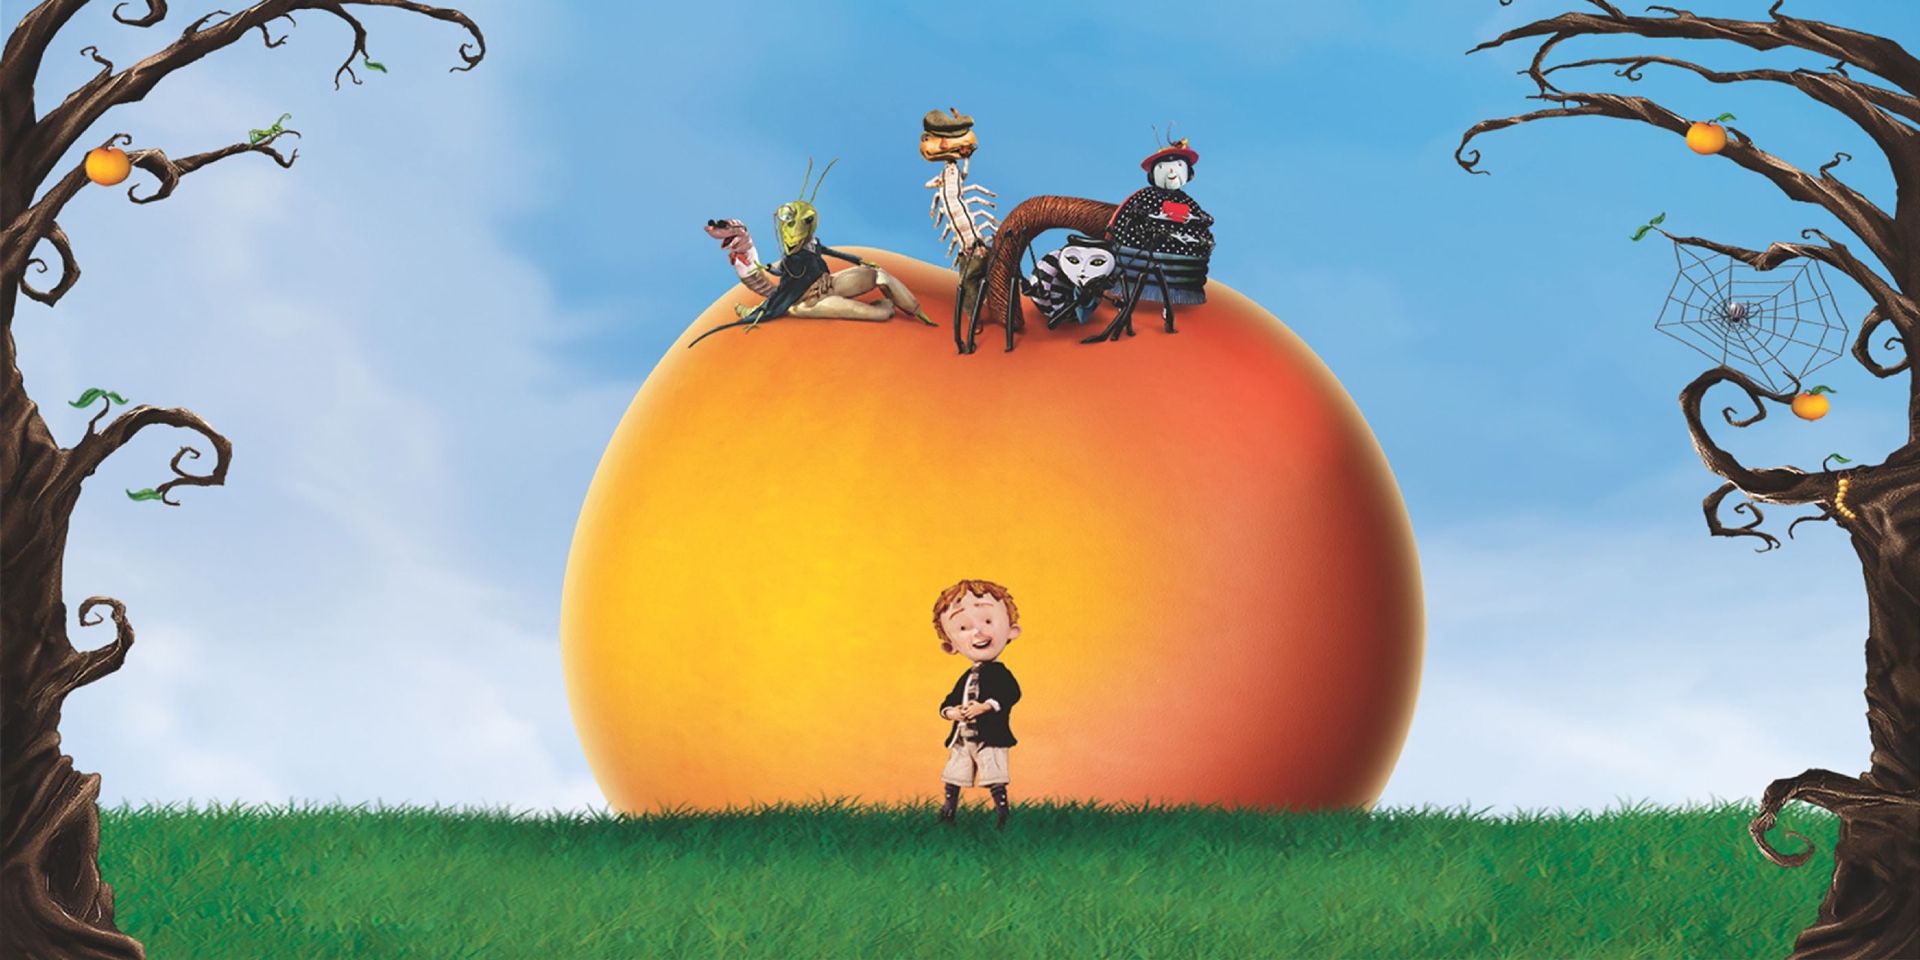 Promotional image for the 1996 movie James and the Giant Peach.